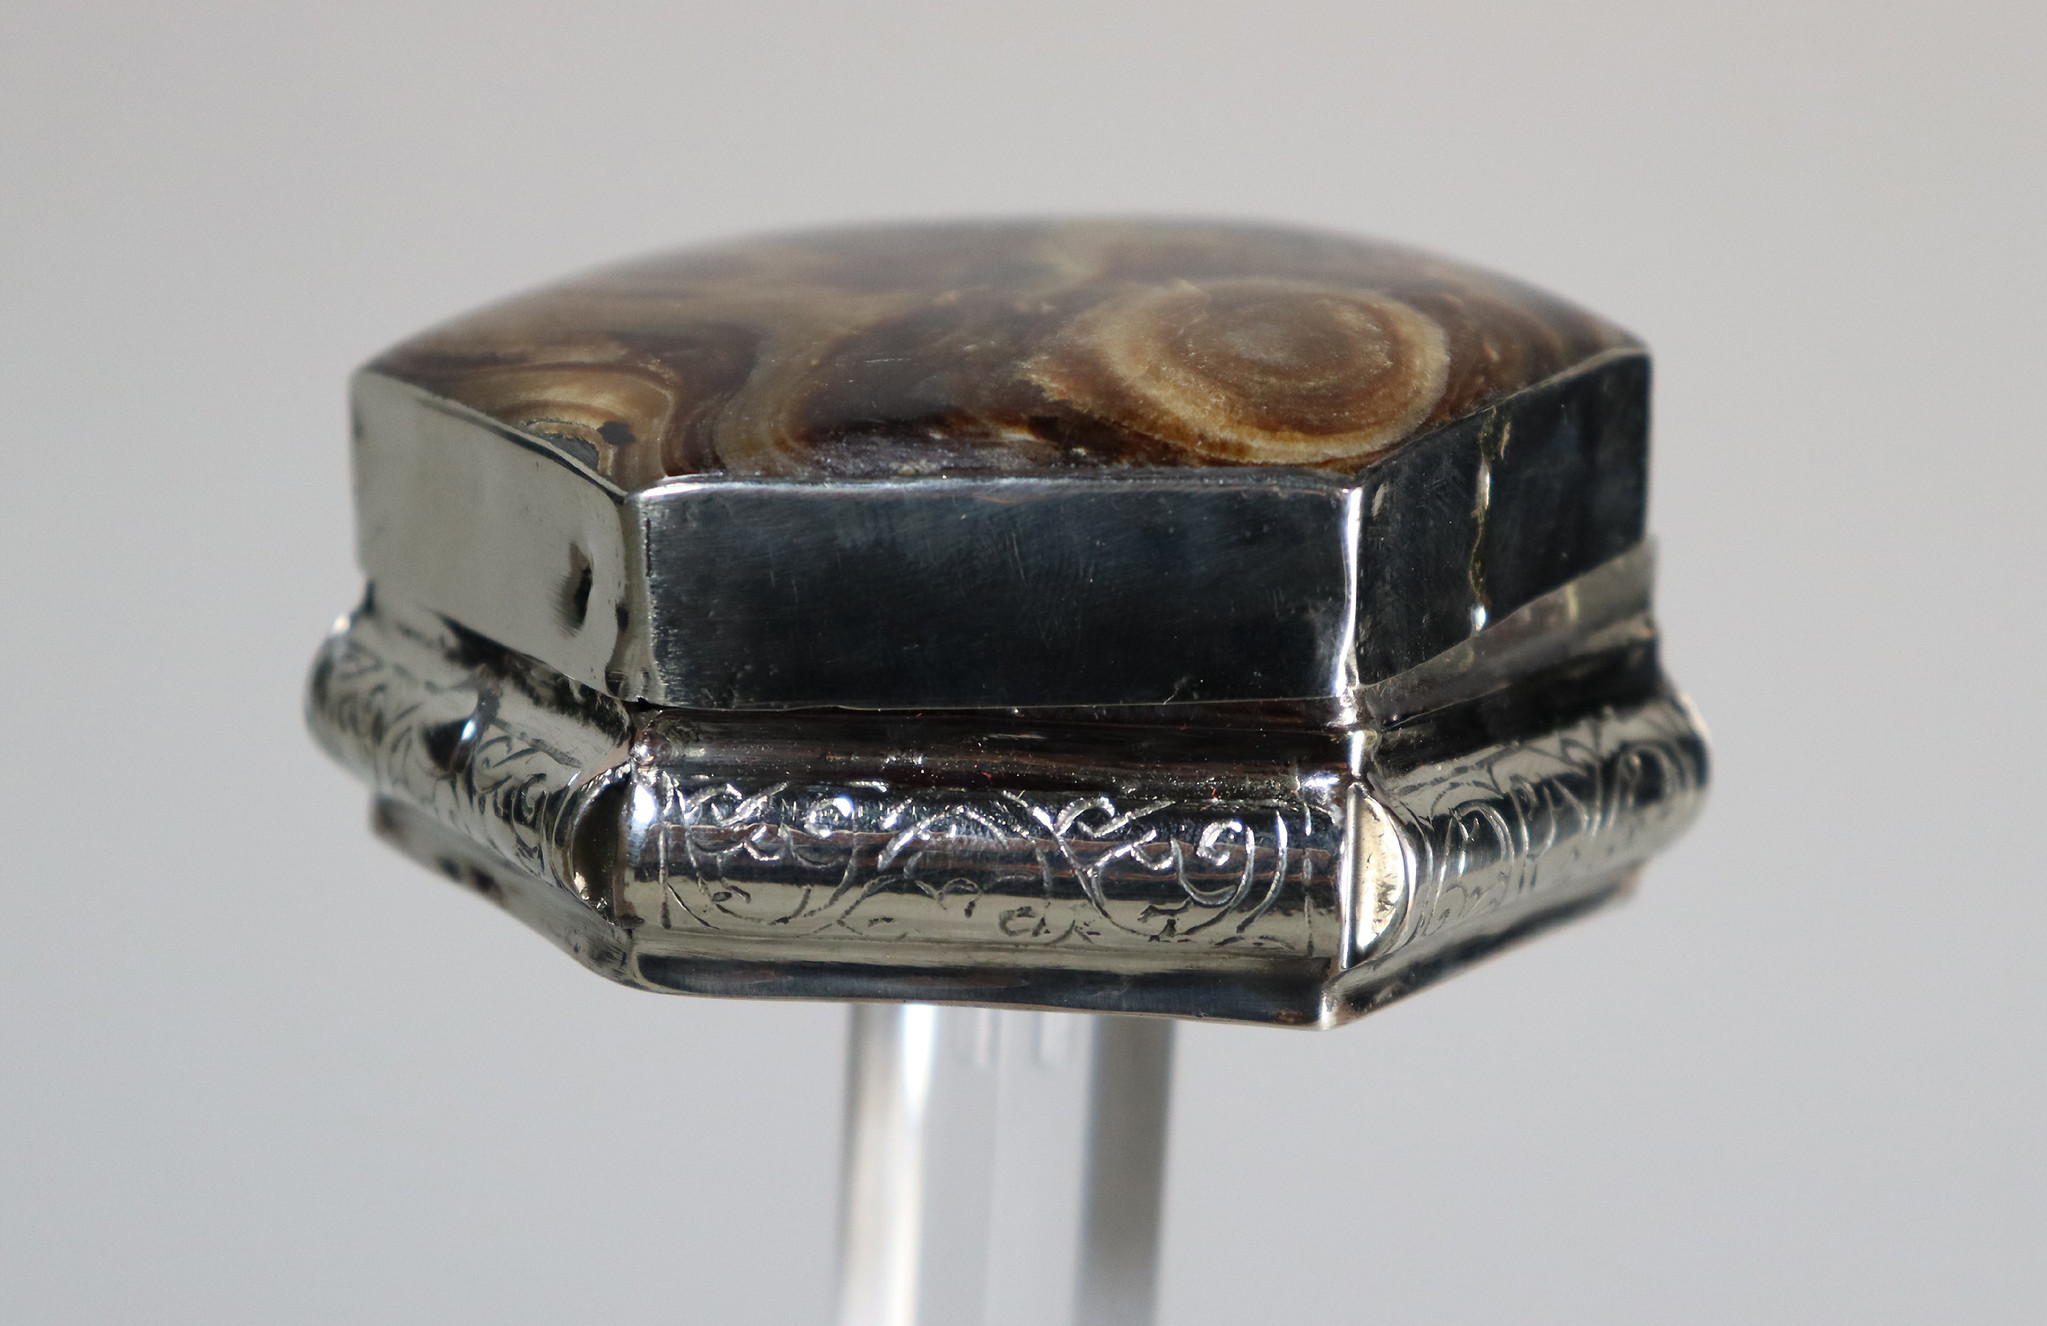 vintage Hand Crafted stunning Afghan Pillbox Box brass agate Gemstone decorated from Afghanistan No:IT56